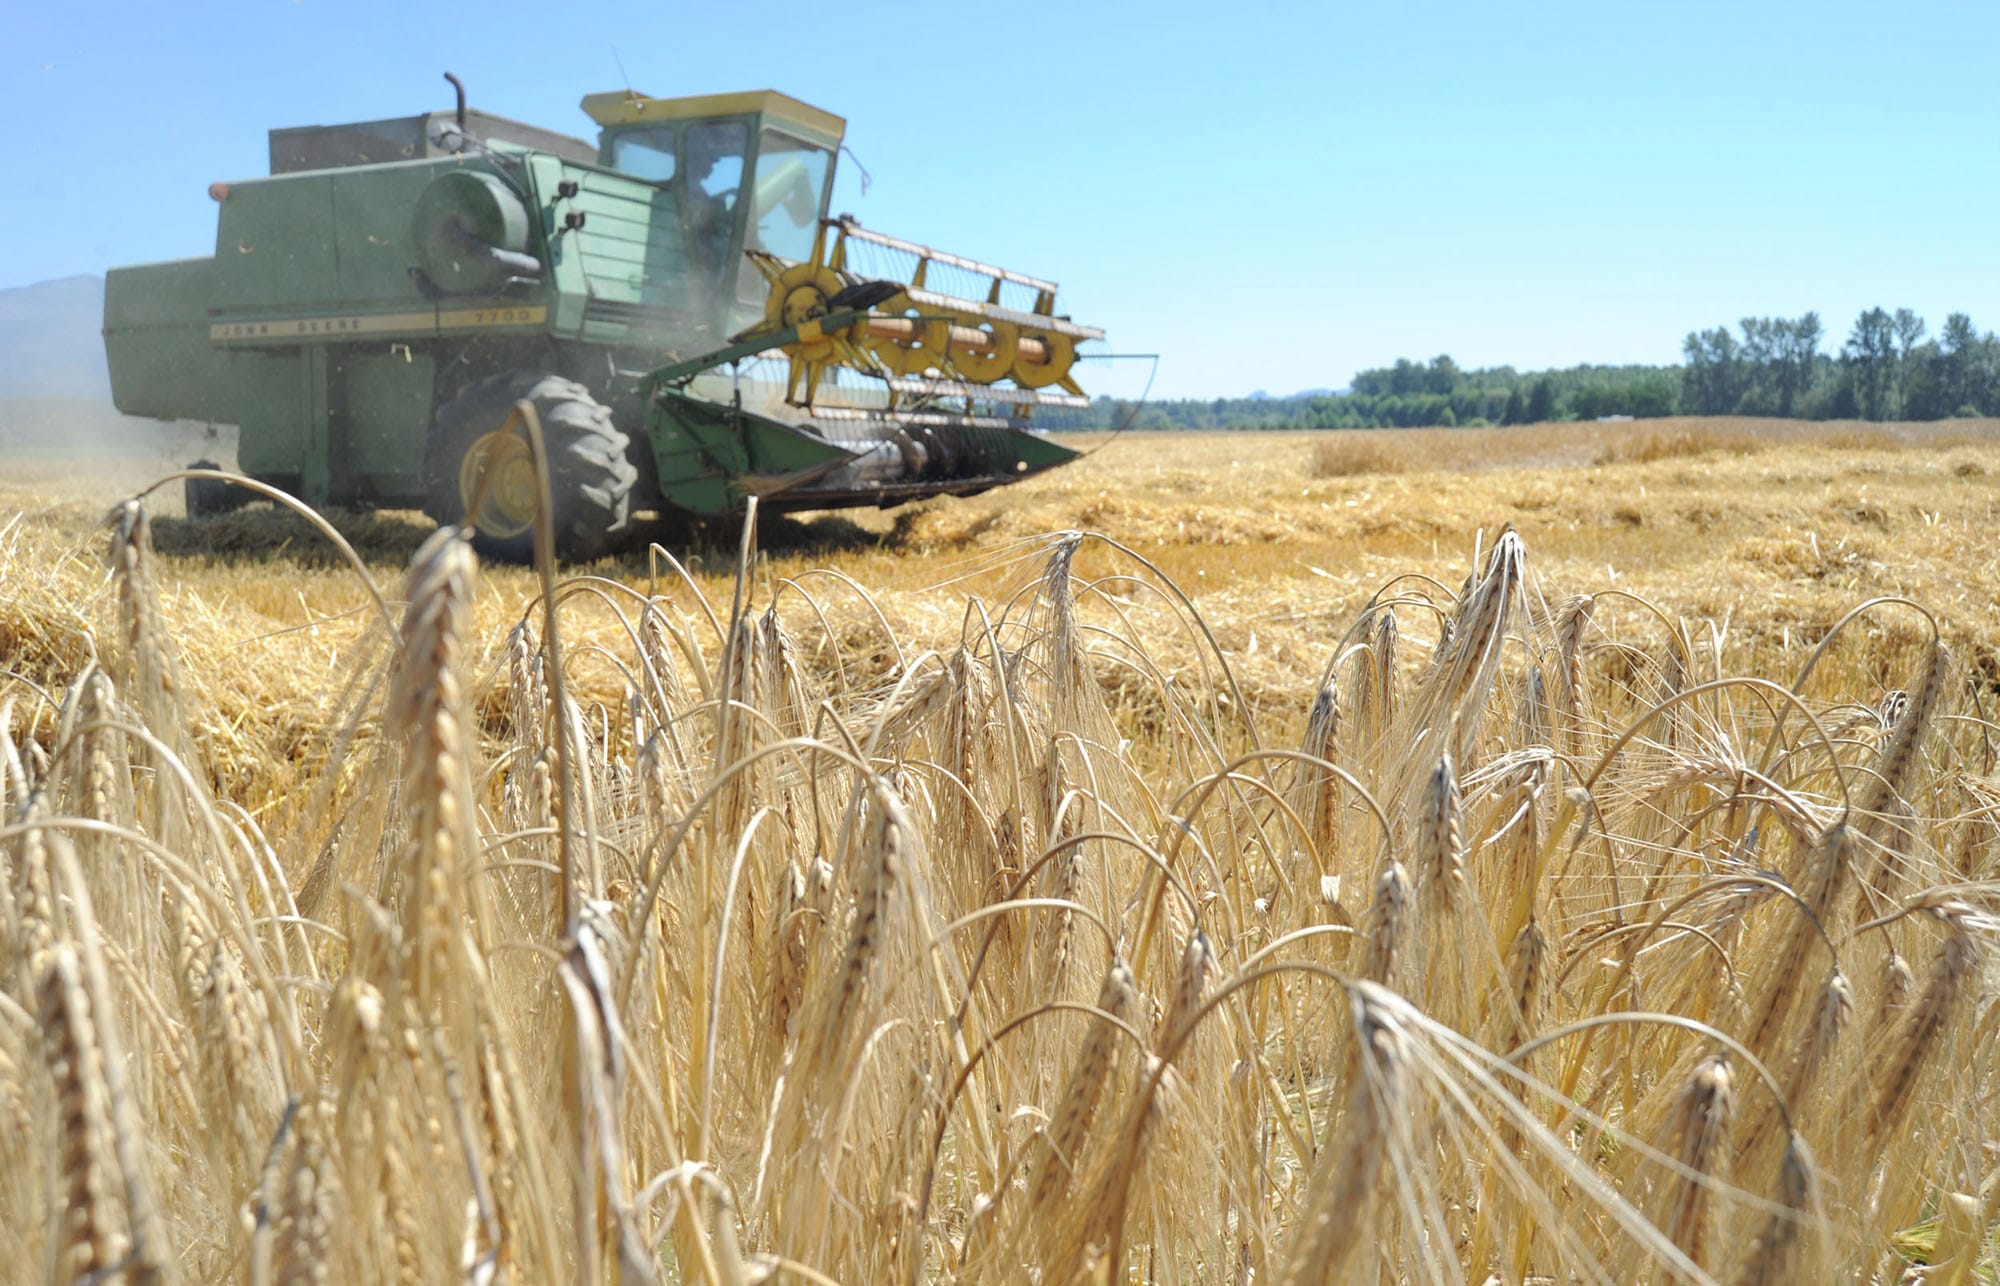 Four years after embarking on a mission to raise the value of locally grown grain, the team at Skagit Valley Malting Co. in Burlington is nearly ready to move into production.